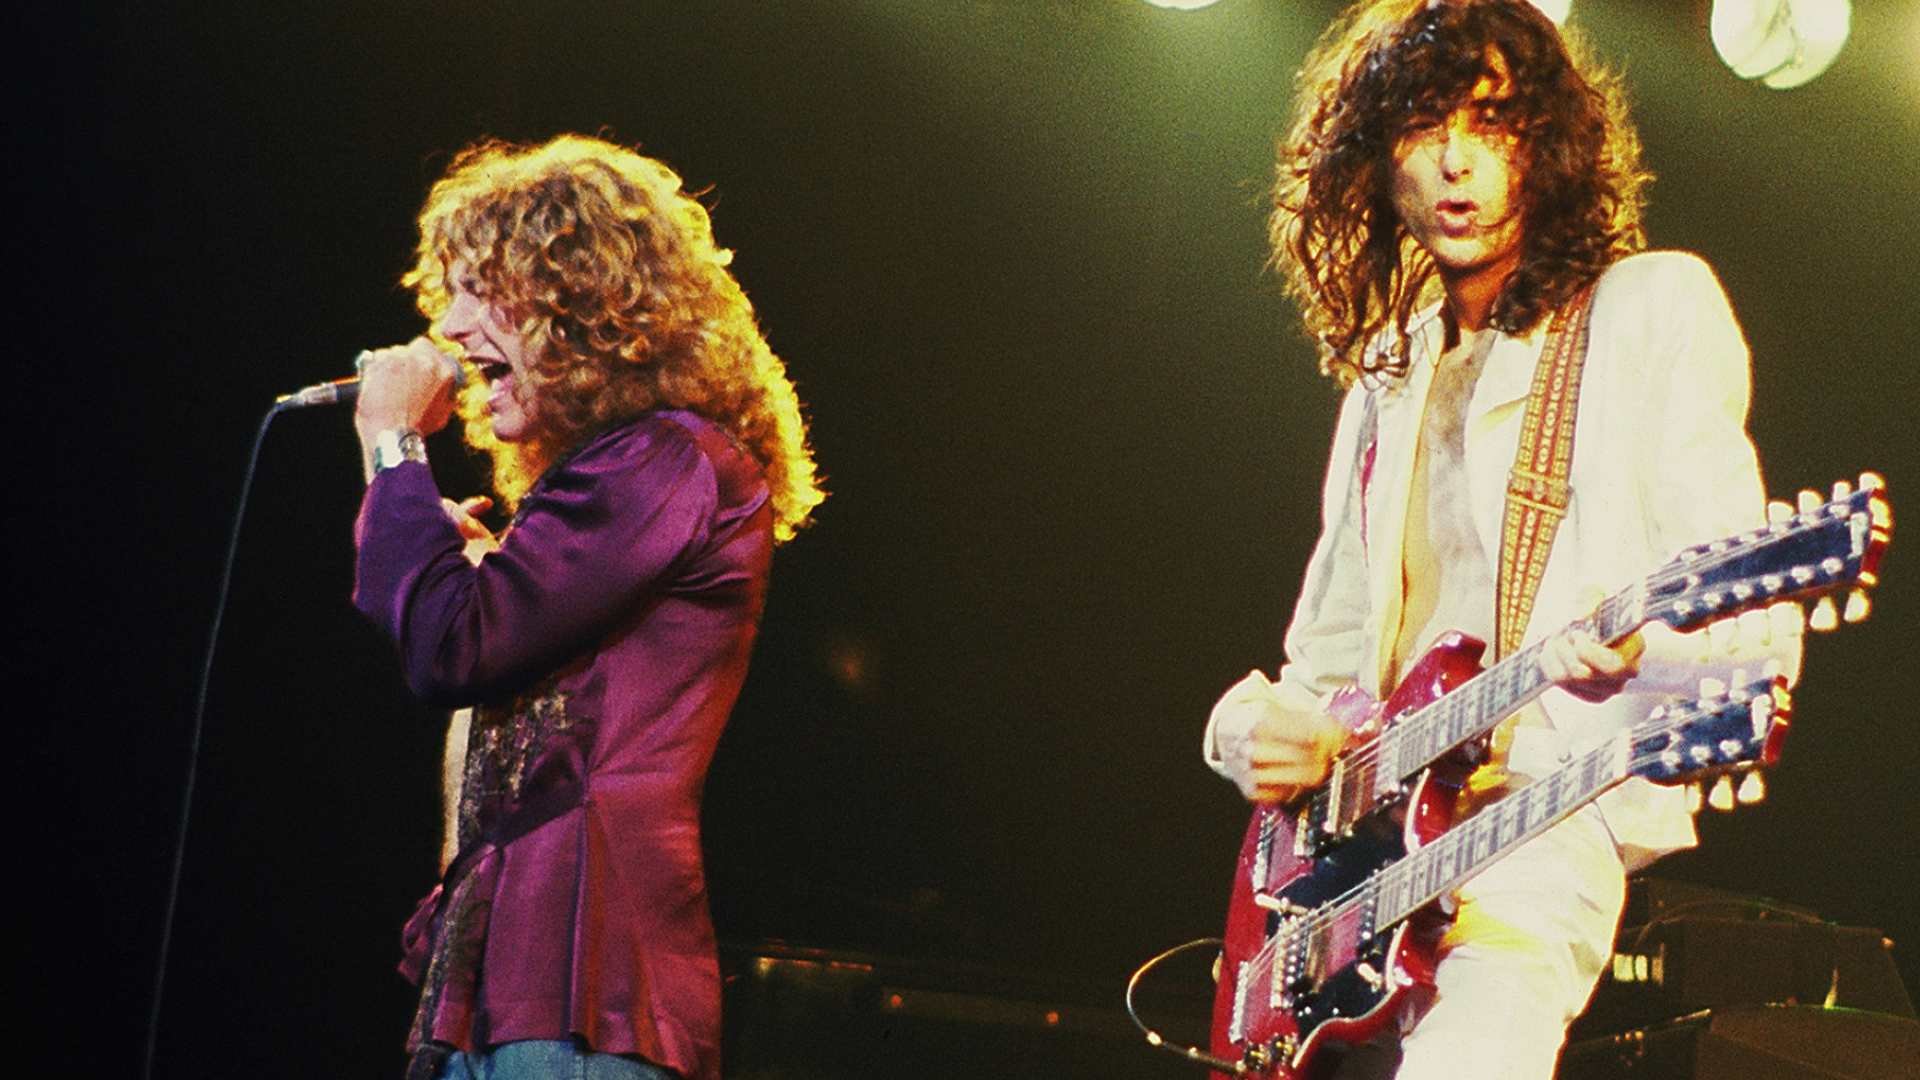 Best Led Zeppelin Wallpaper Id 401621 For High Resolution Hd 1080p Images, Photos, Reviews